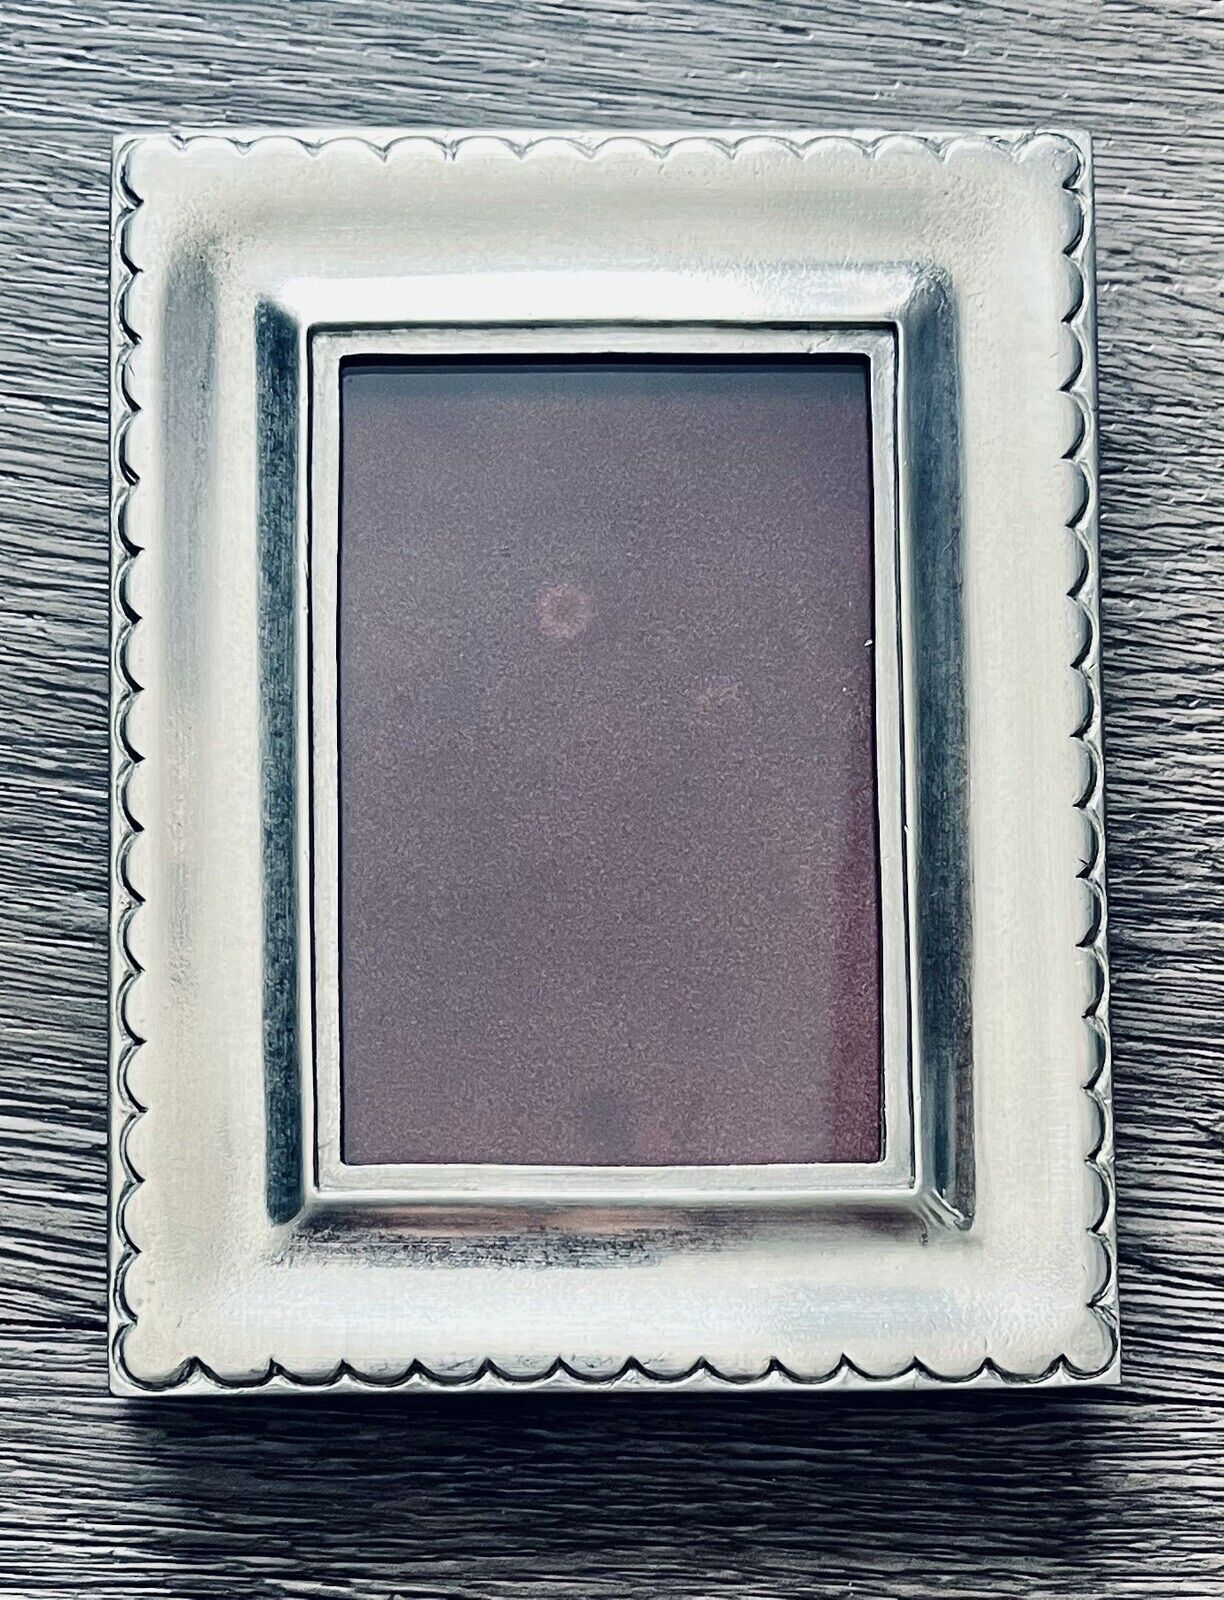 Match Pewter Trentino Small Picture Frame